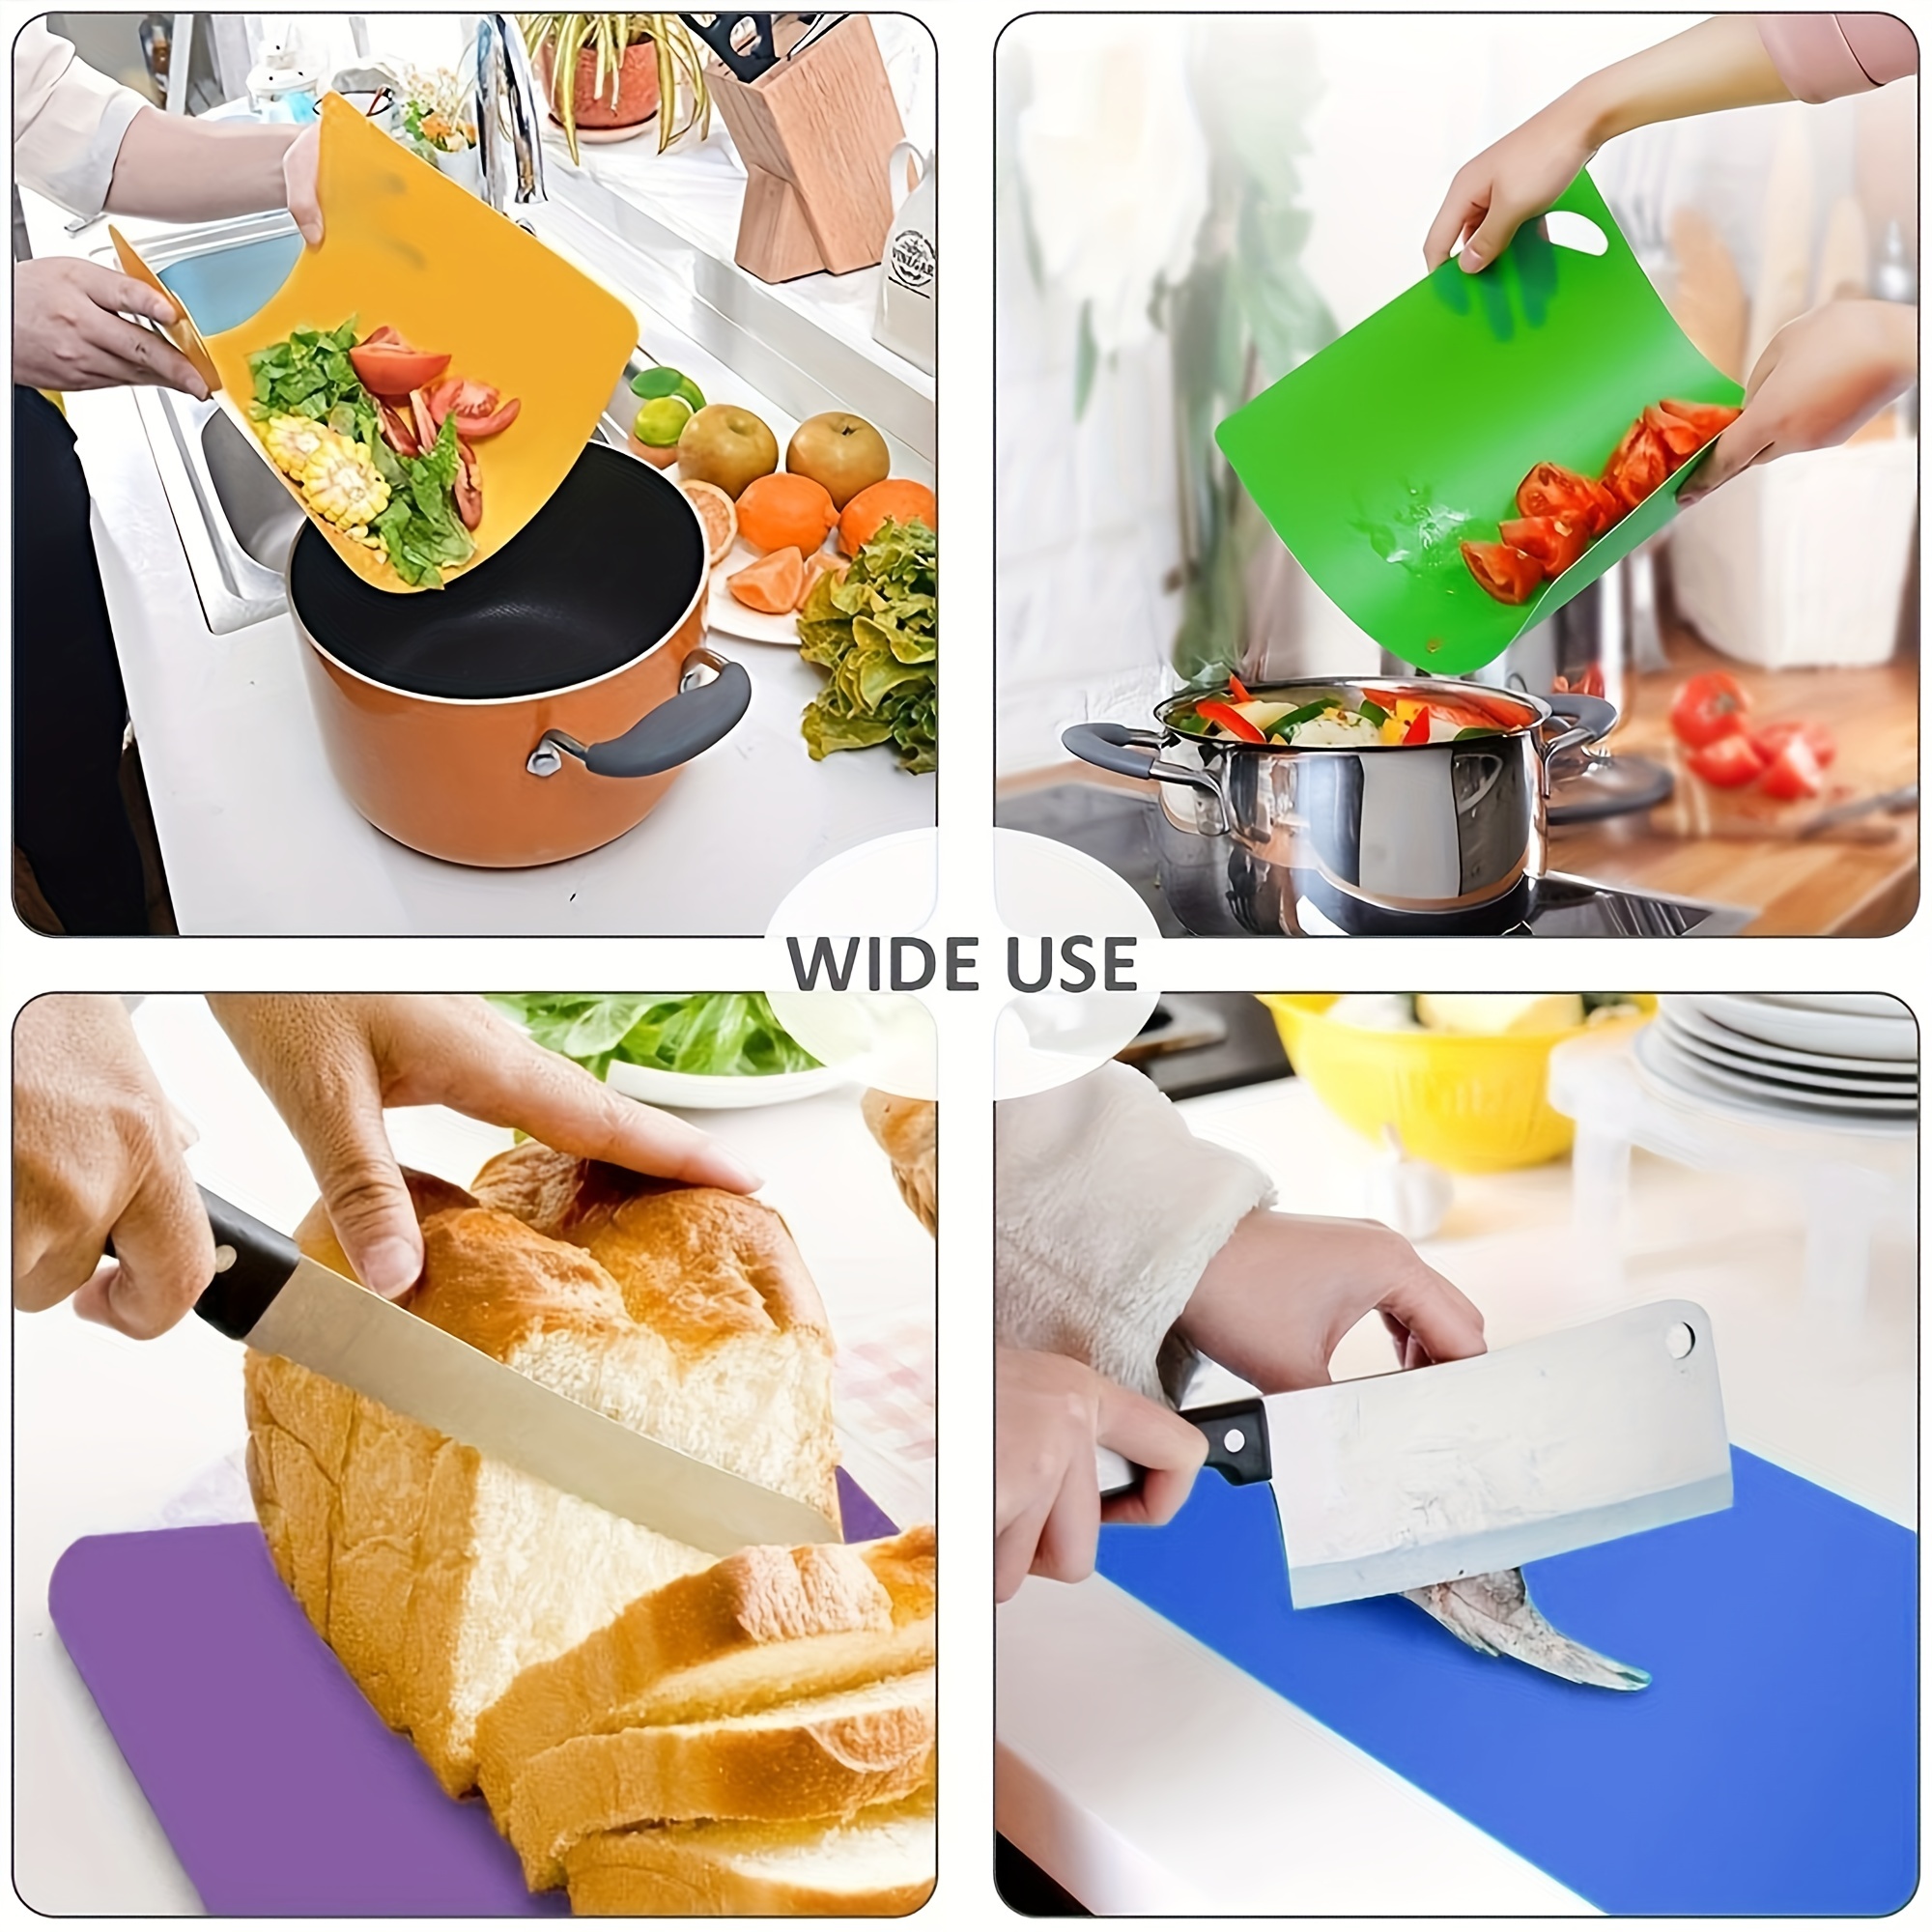 Cooking Concepts Flexible Chopping Mats, 2-ct. Packs